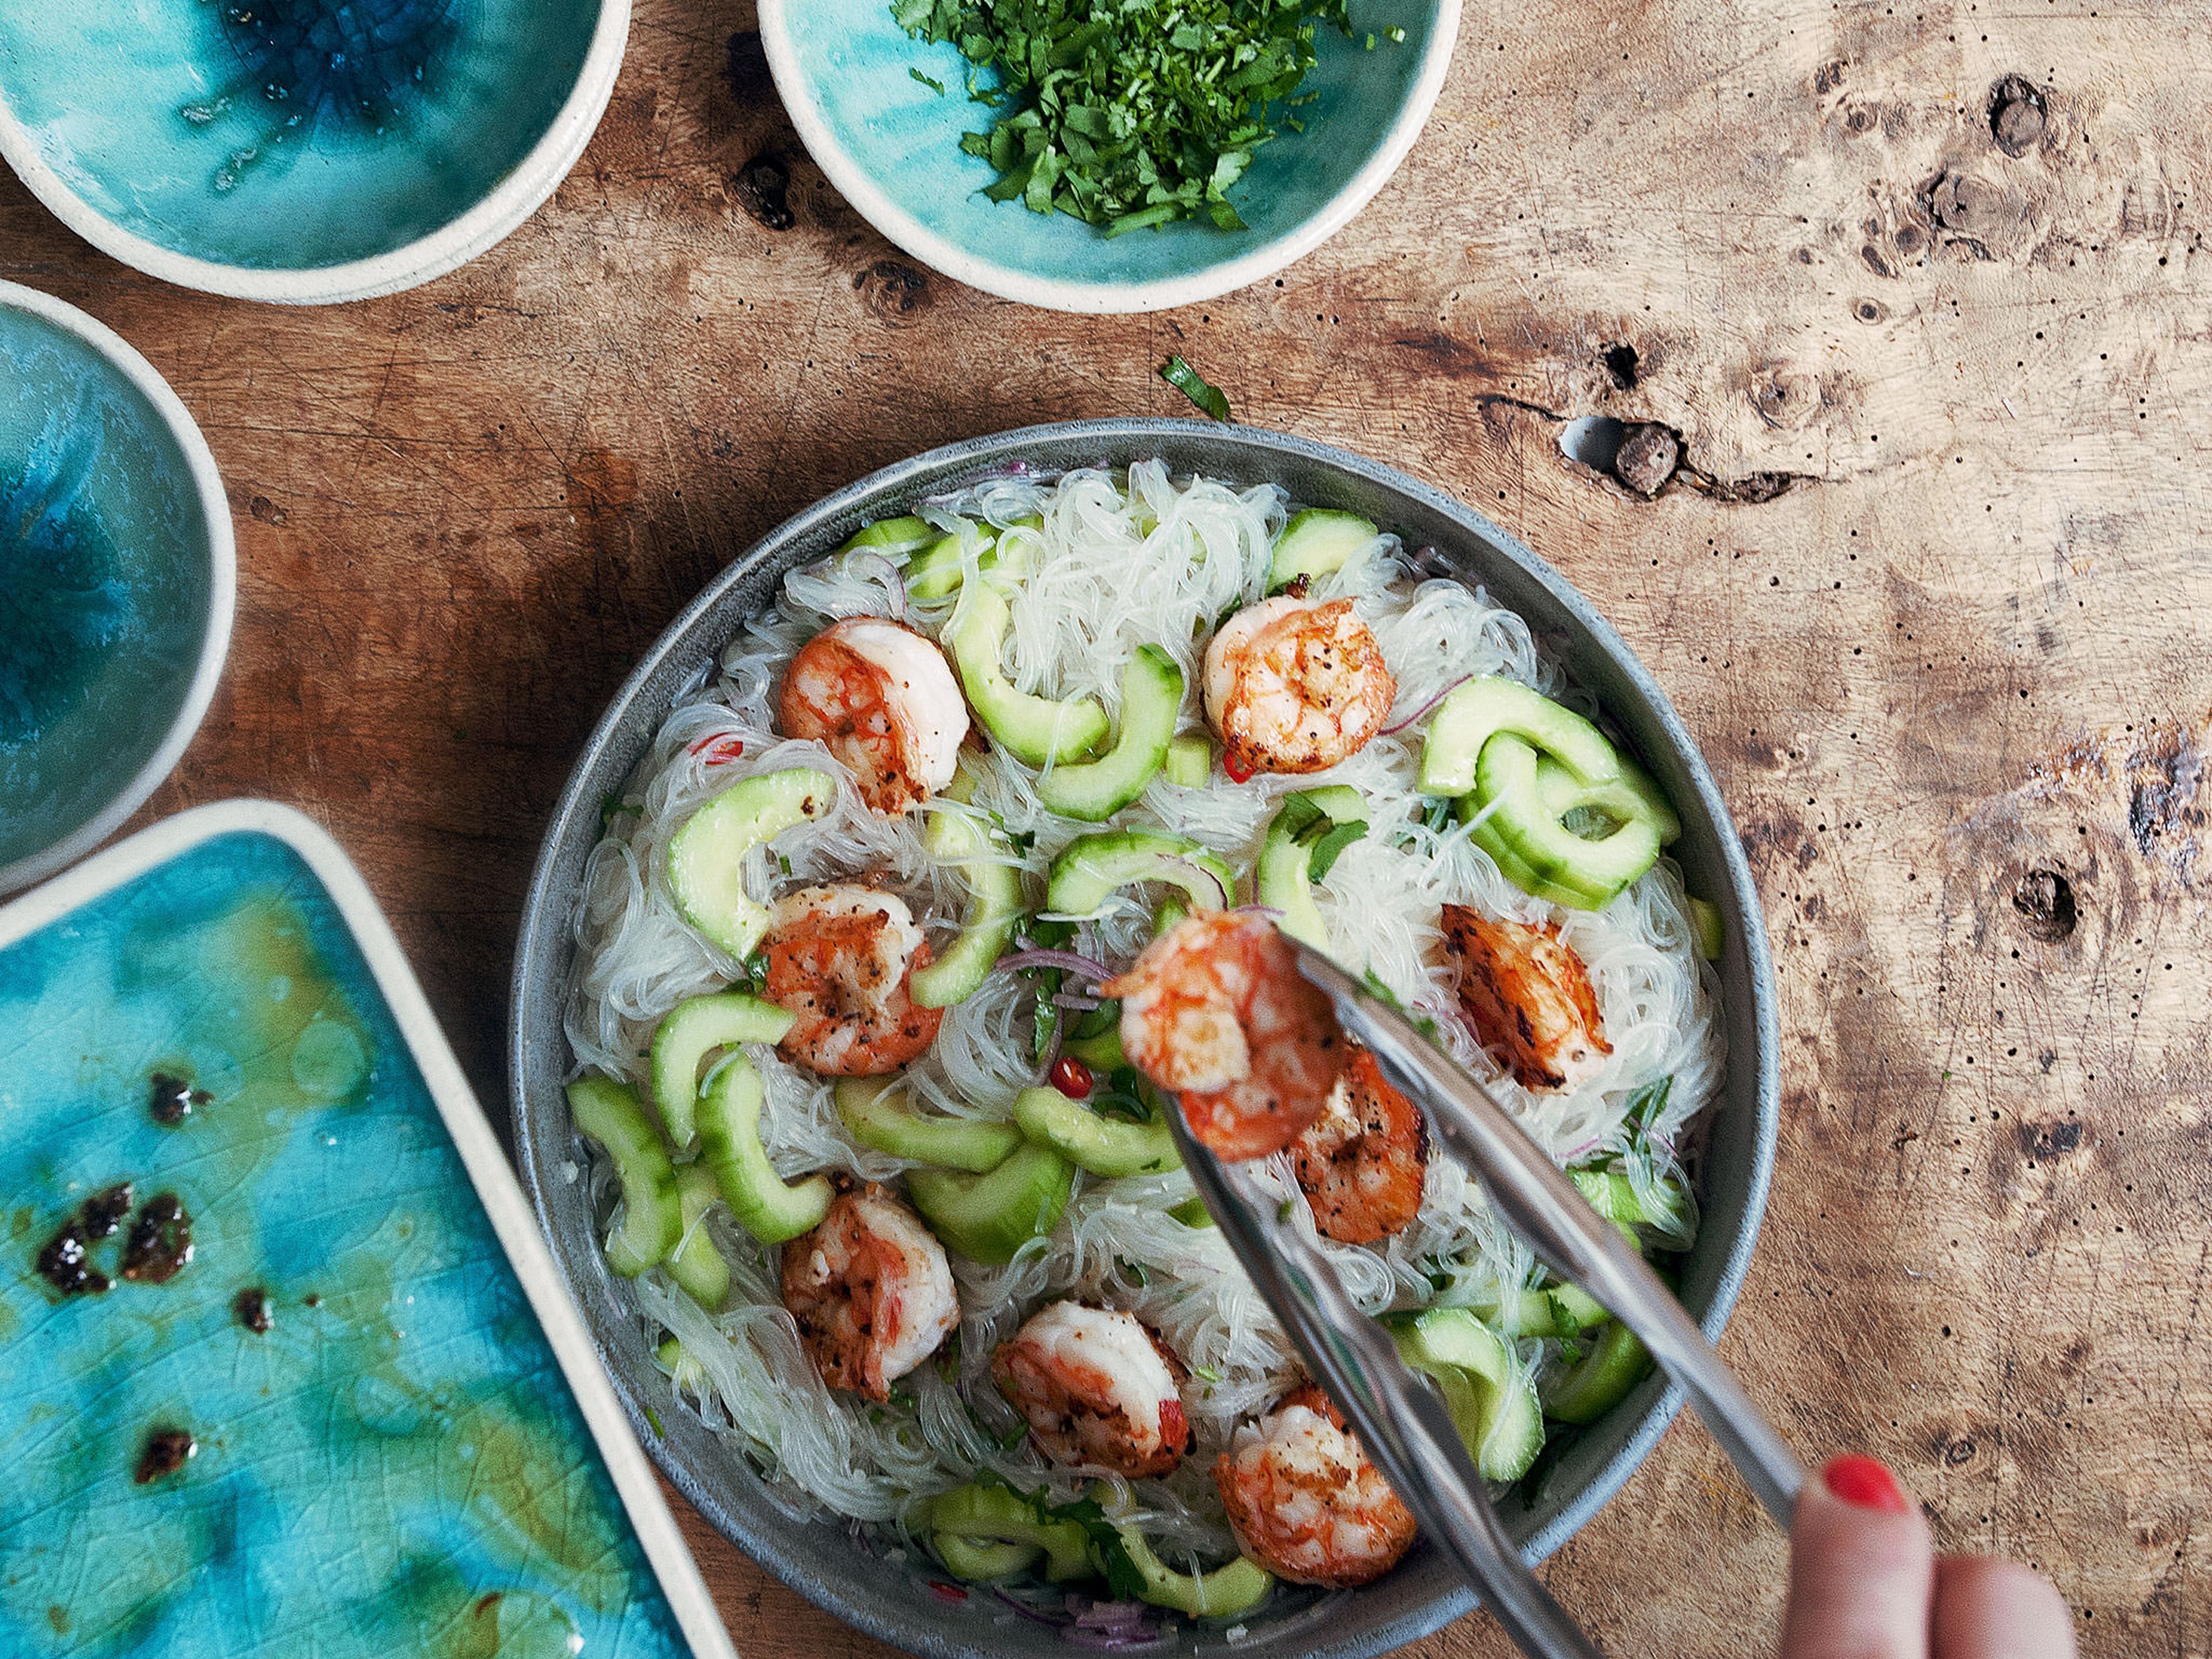 In a large bowl, combine cucumber, onion, garlic, chili pepper, toasted sesame oil, fish sauce, and lemon juice and toss. Add drained glass noodles to bowl along with shrimp. Mix everything thoroughly together. If desired, add more lime juice, sesame oil, or fish sauce to taste. Top with chopped coriander, serve and enjoy!